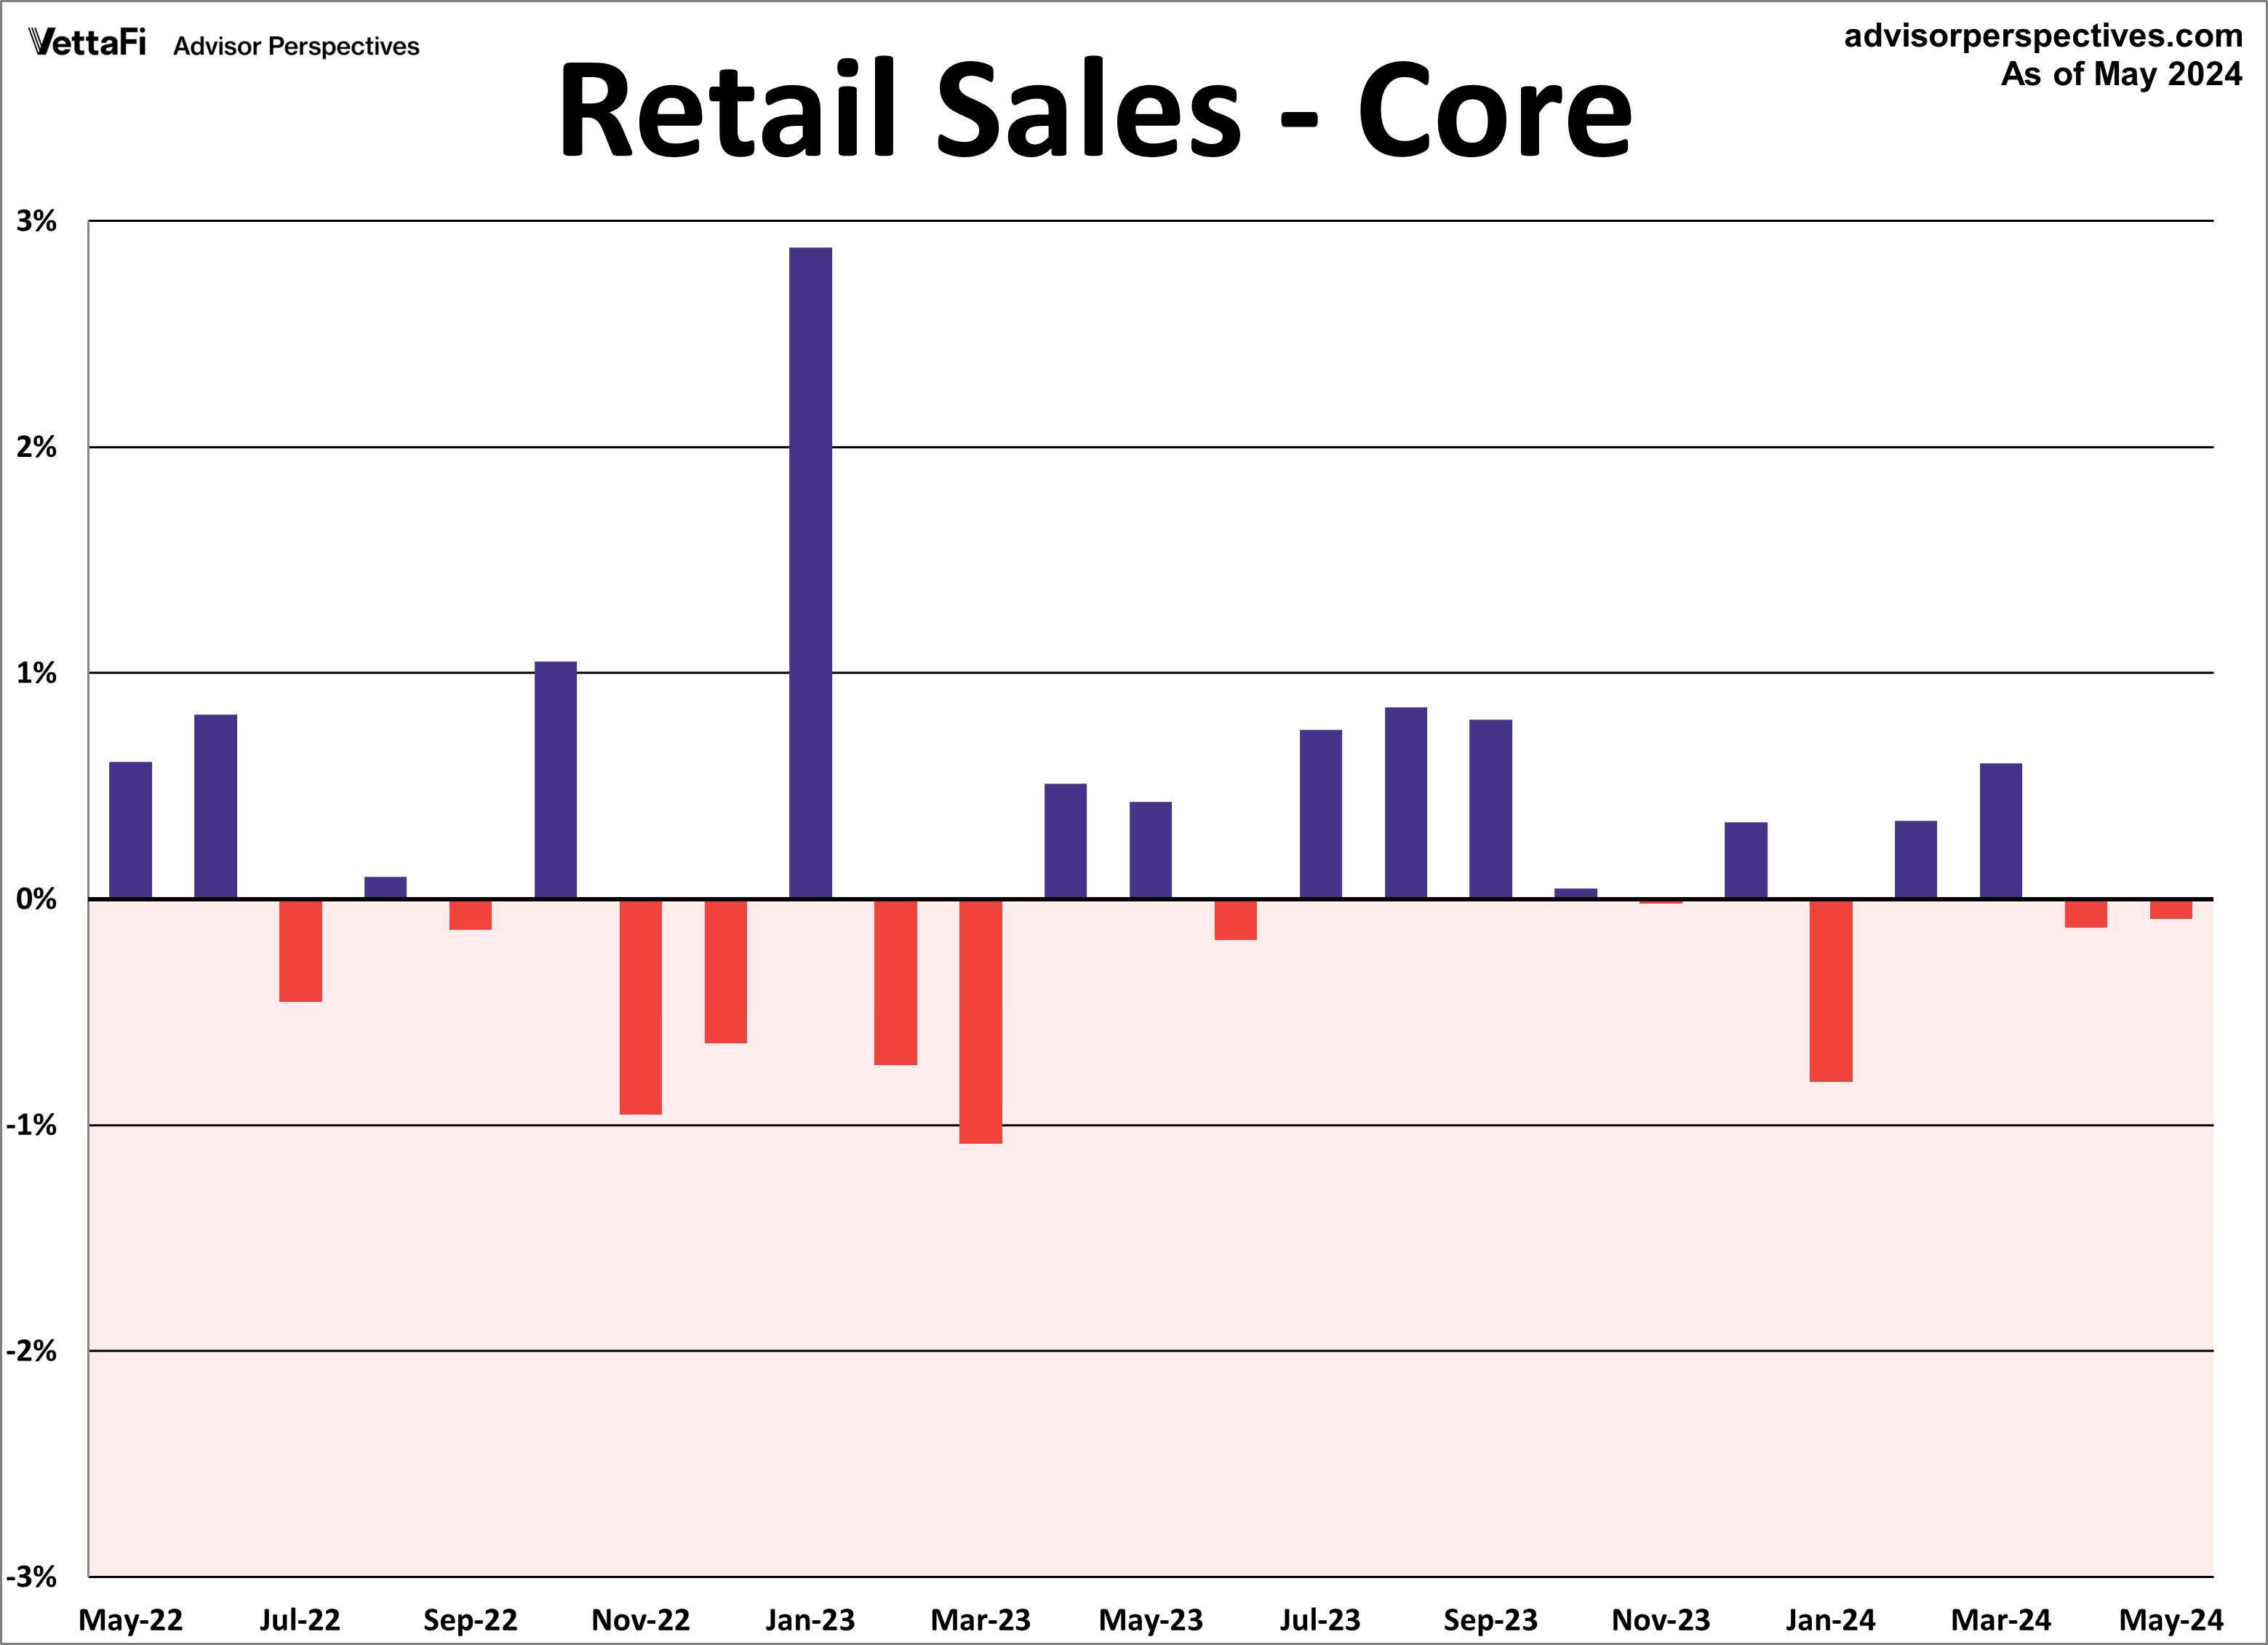 Retail Sales Core MoM 2 Years